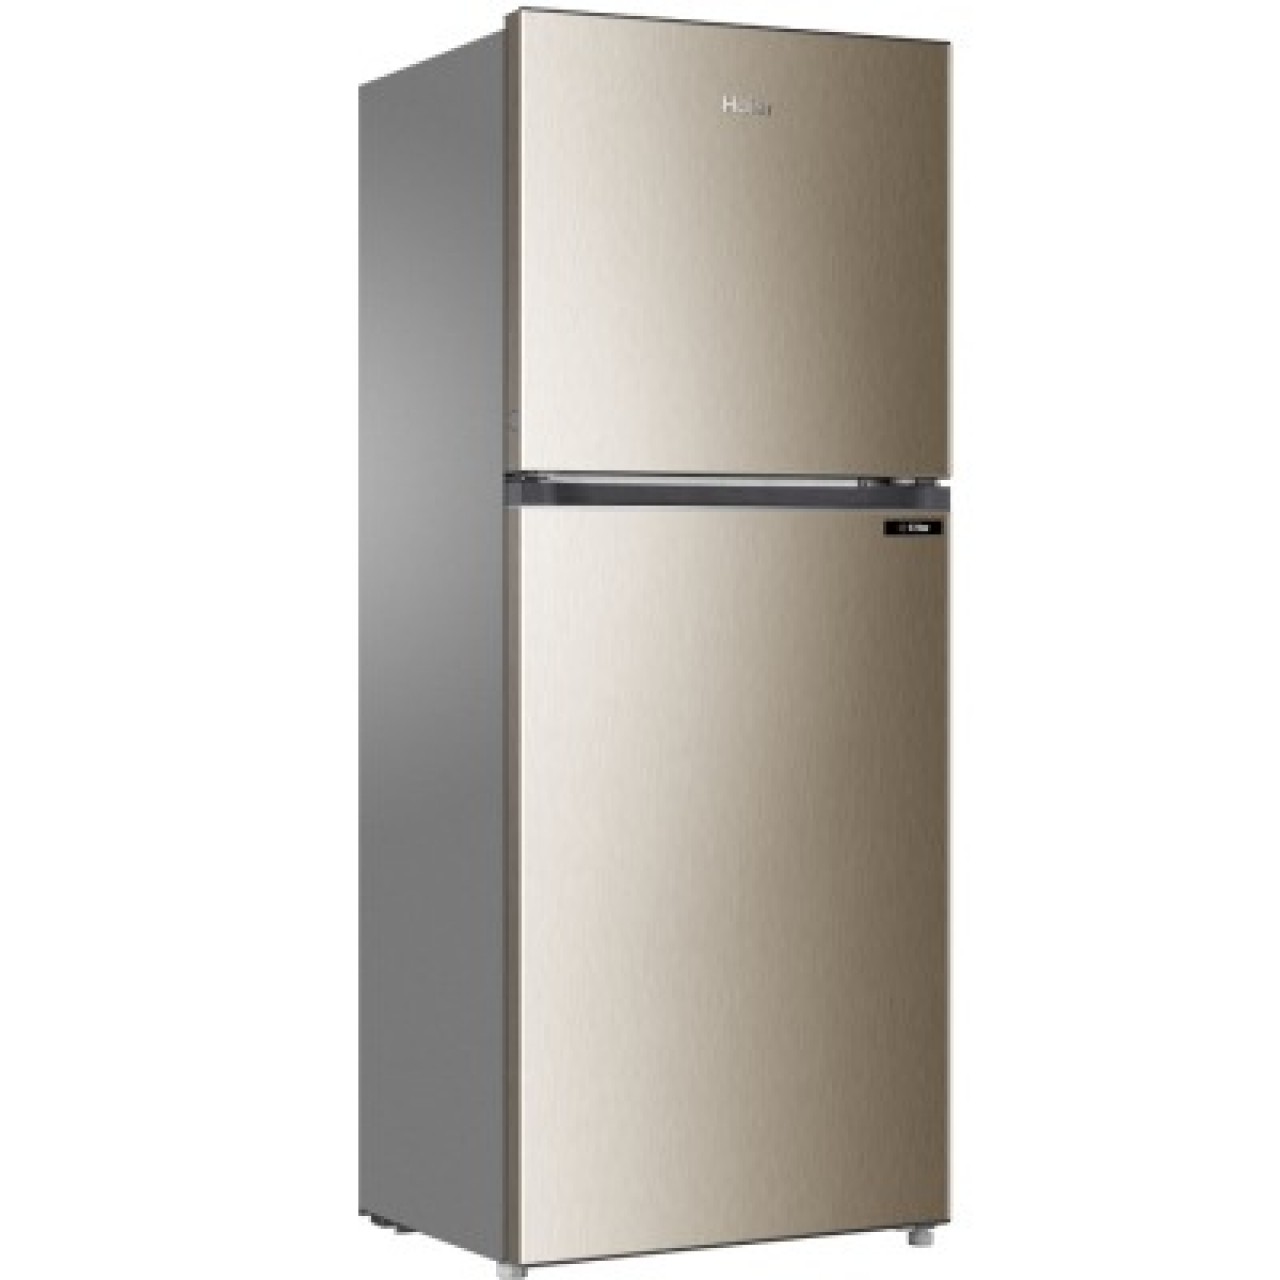 Haier HRF-398EBD Free Standing Refrigerator - Direct Freezer Cooling - Full Electric Solution